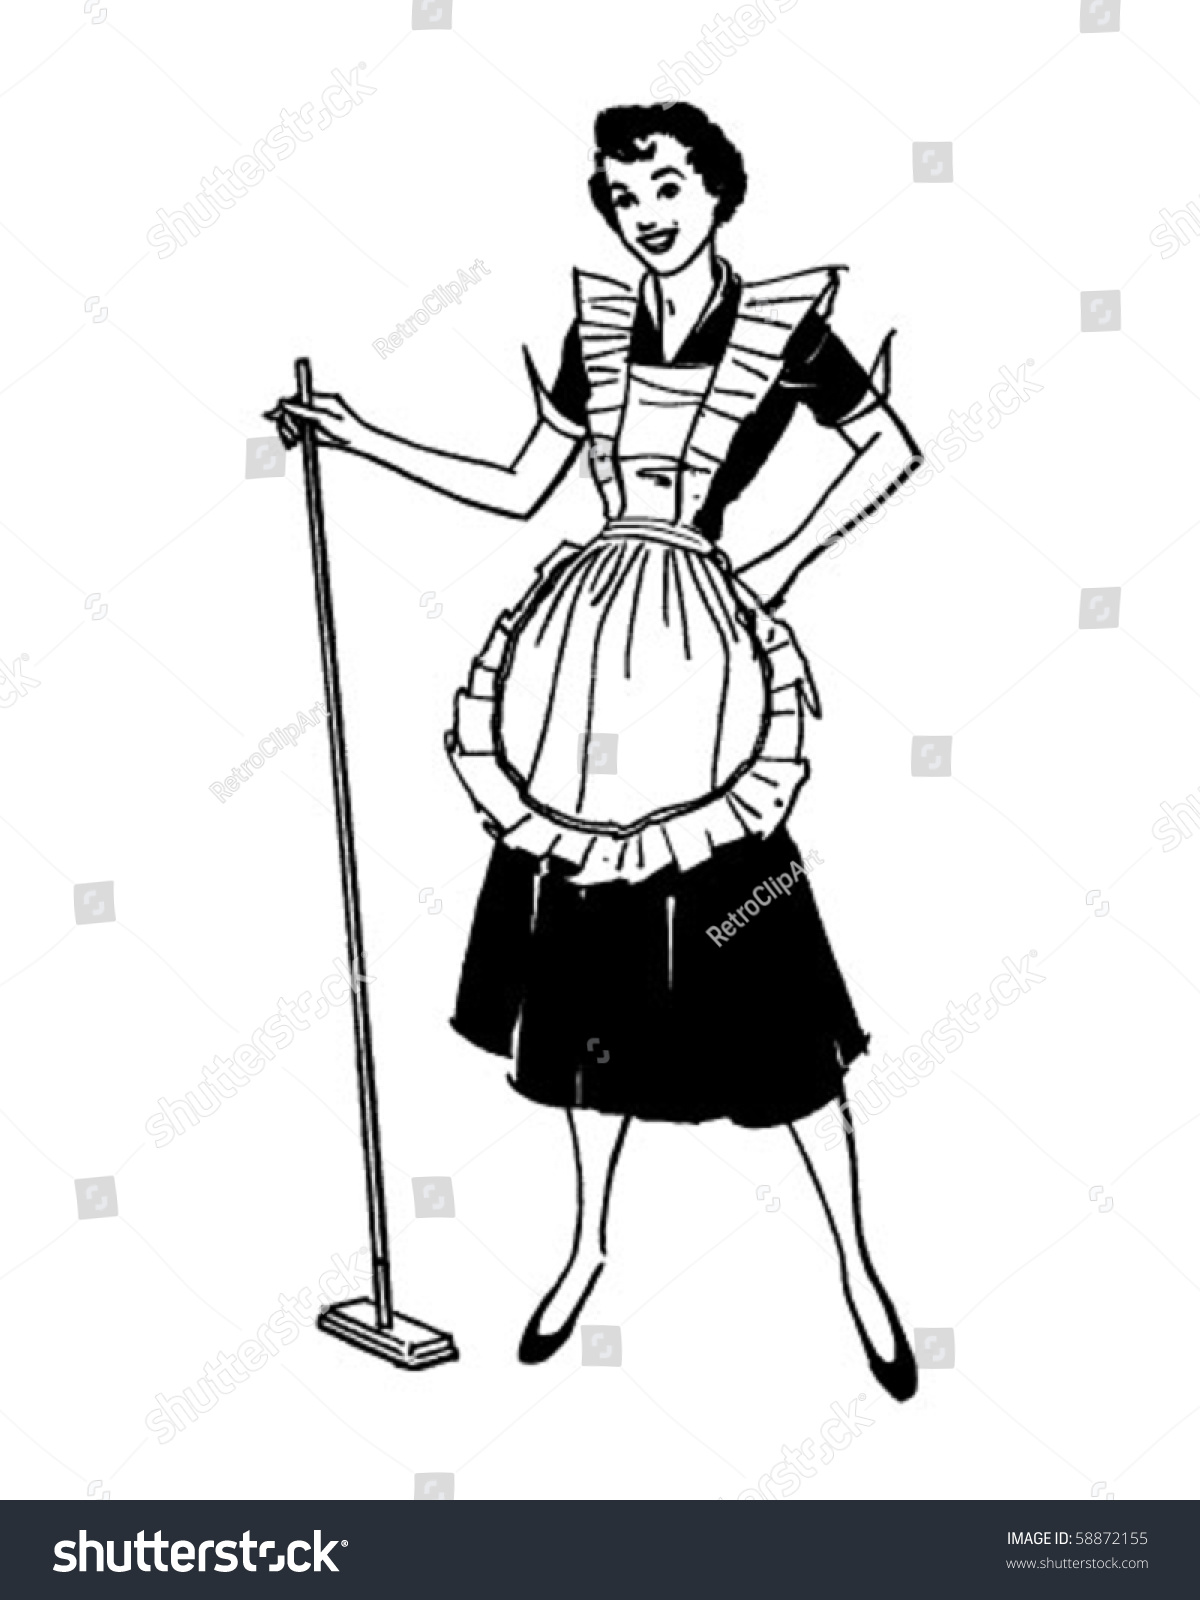 vintage housewife clipart - photo #7